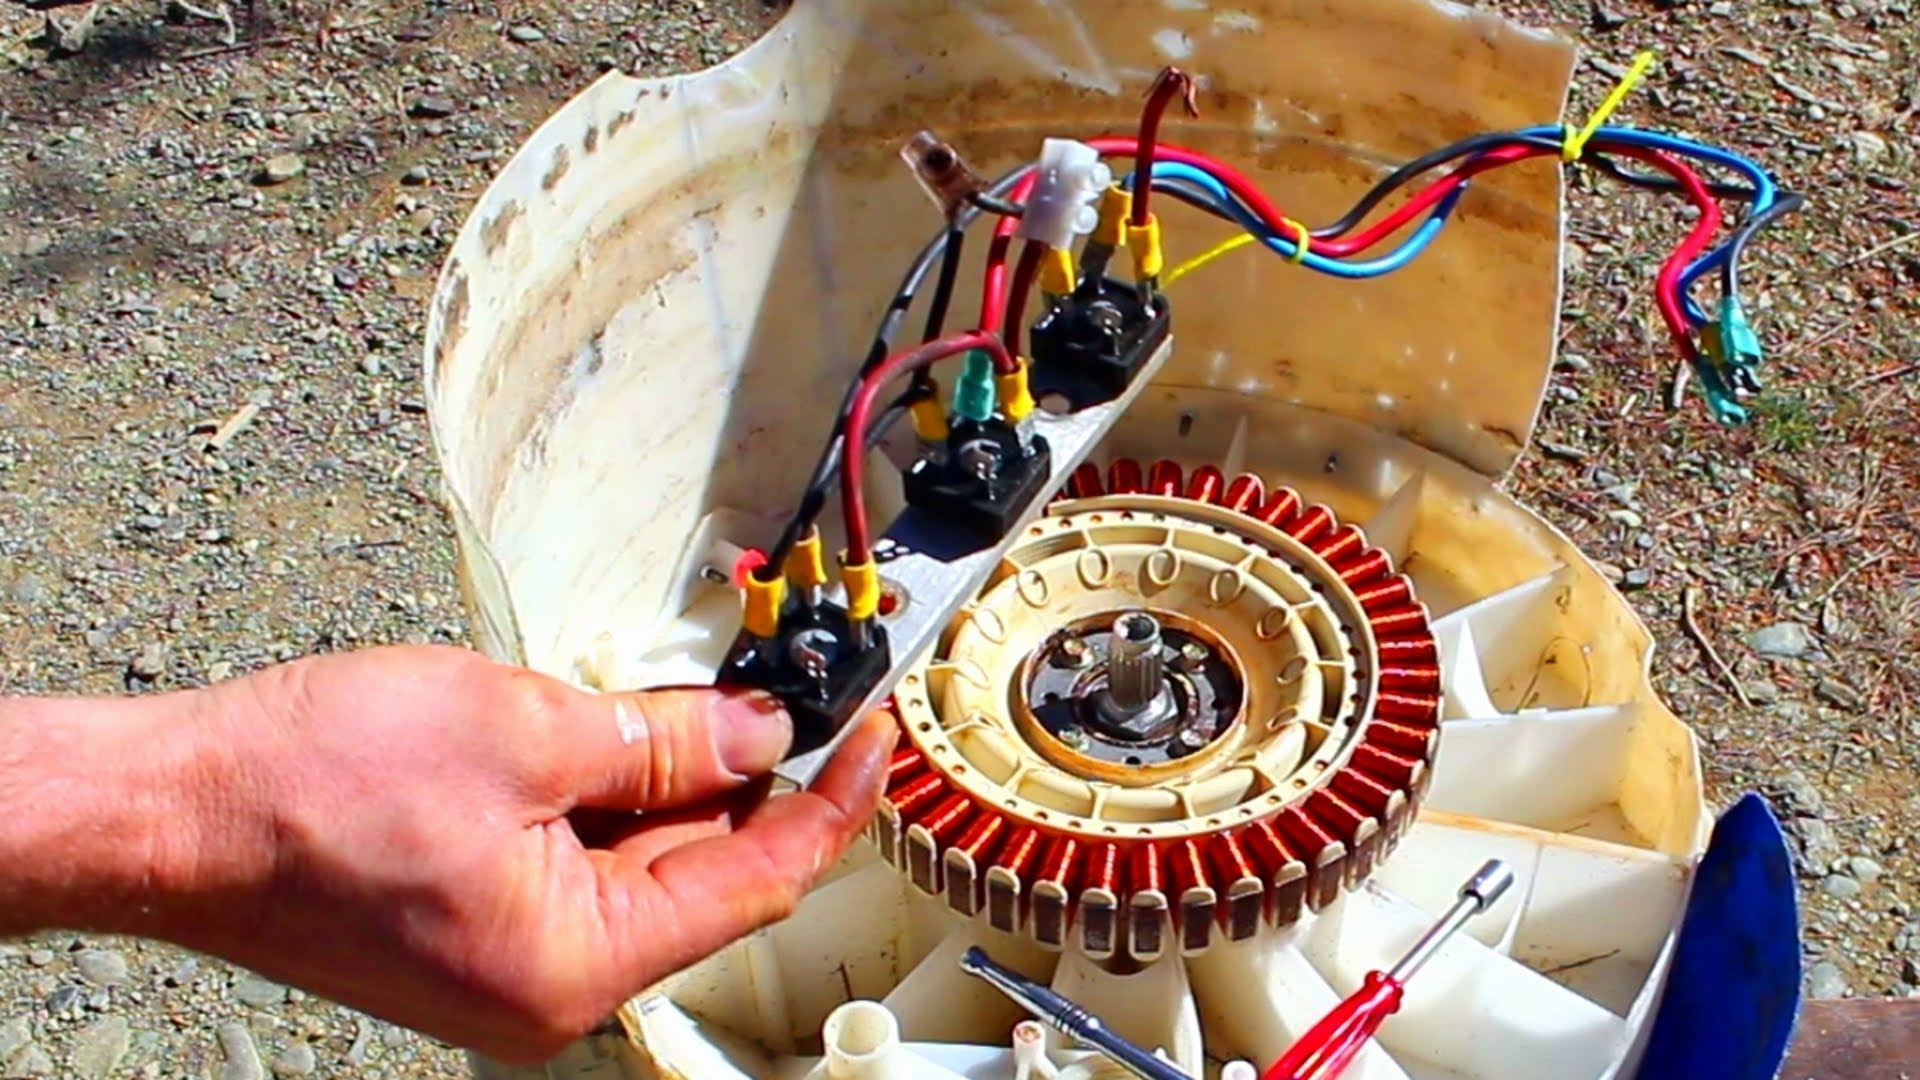 How To Make A Water powered Generator Out Of An Old 